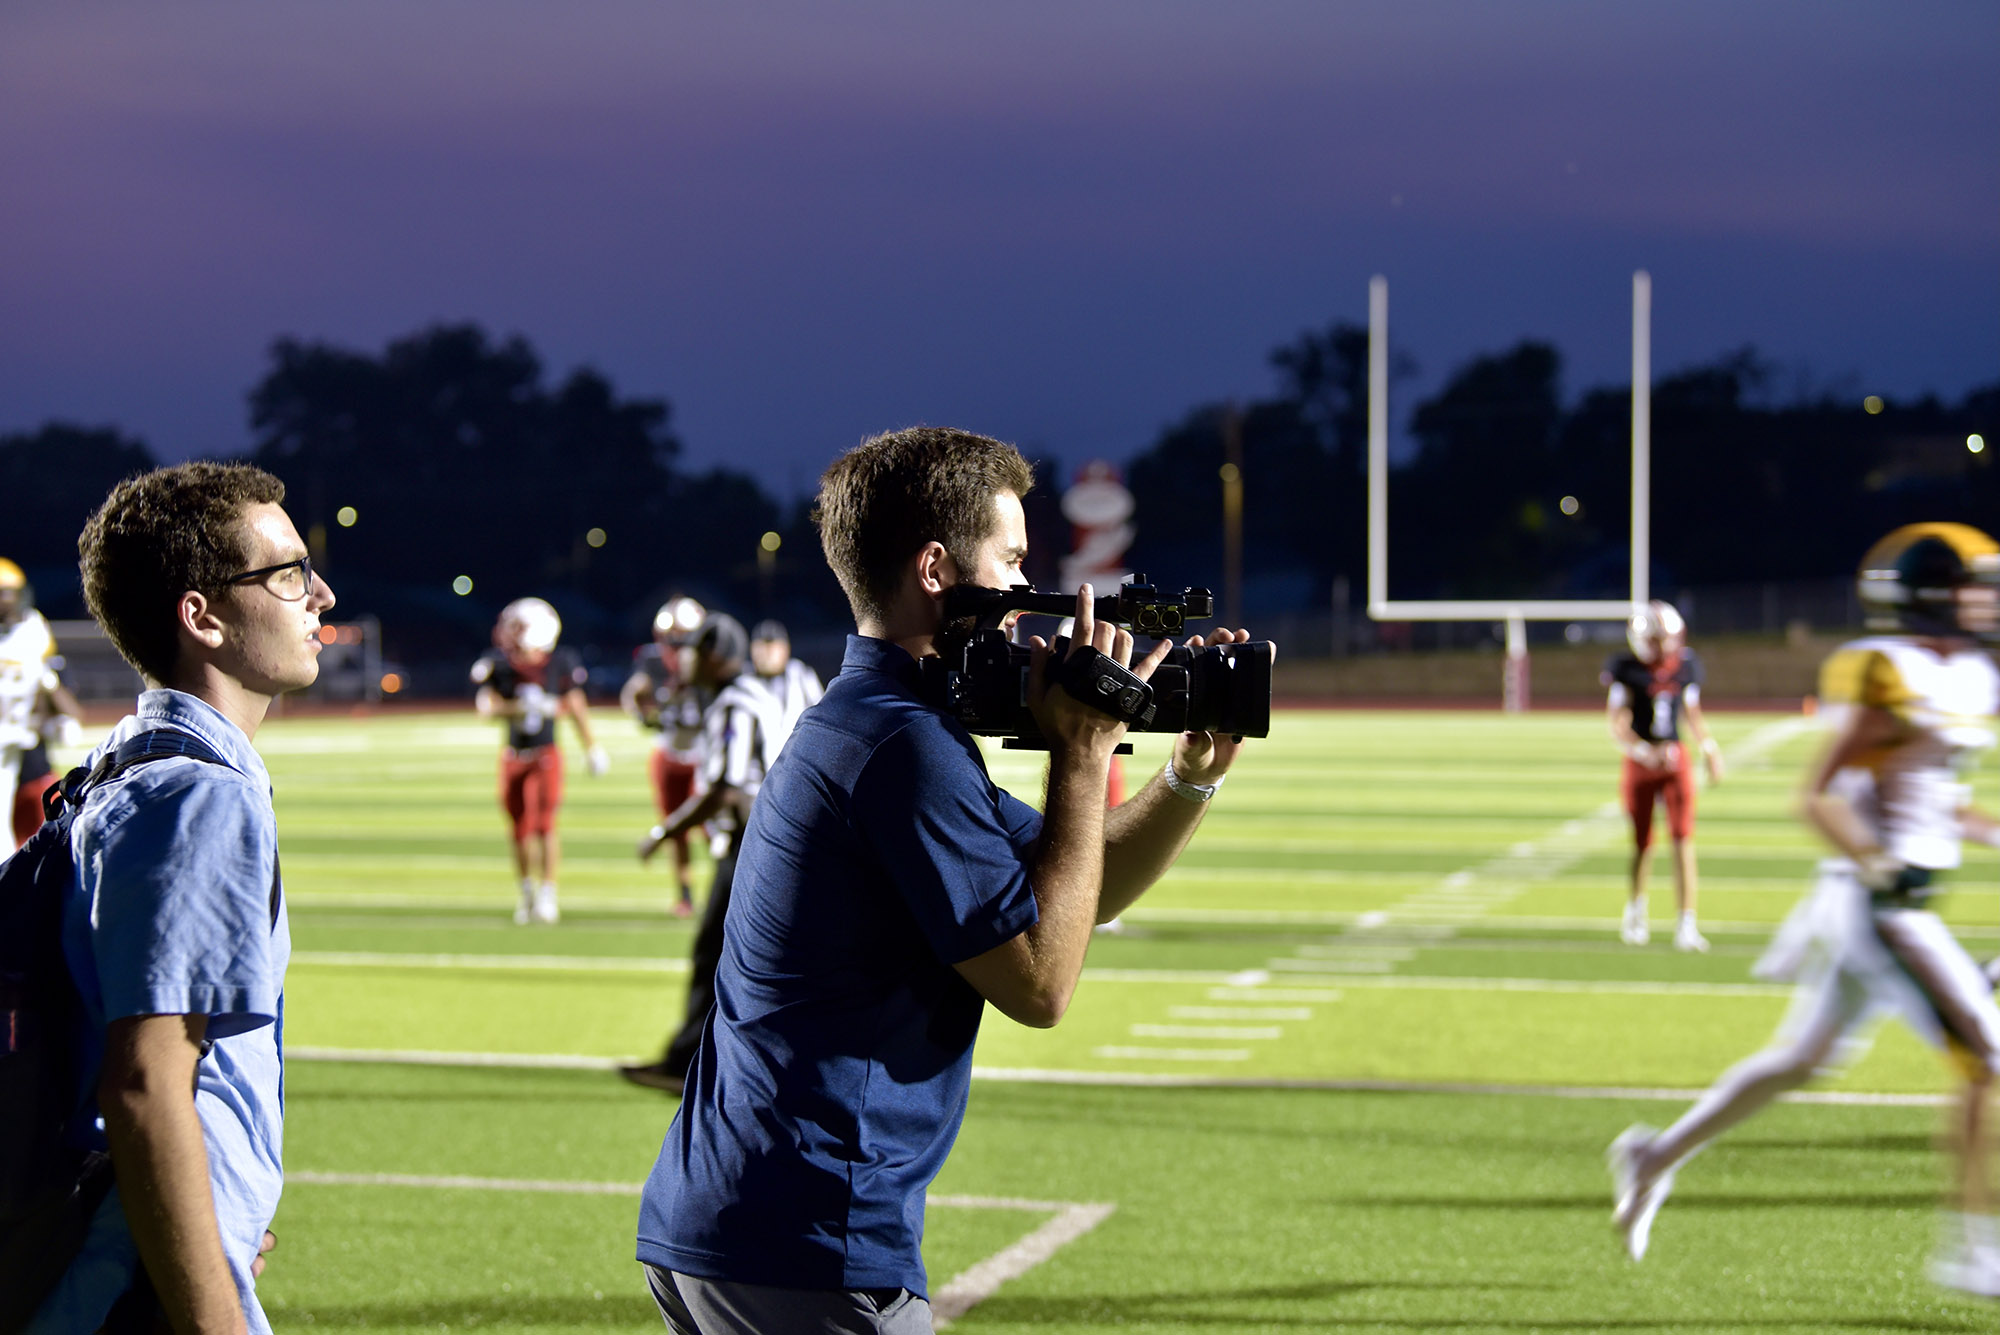 a student records video during a football game